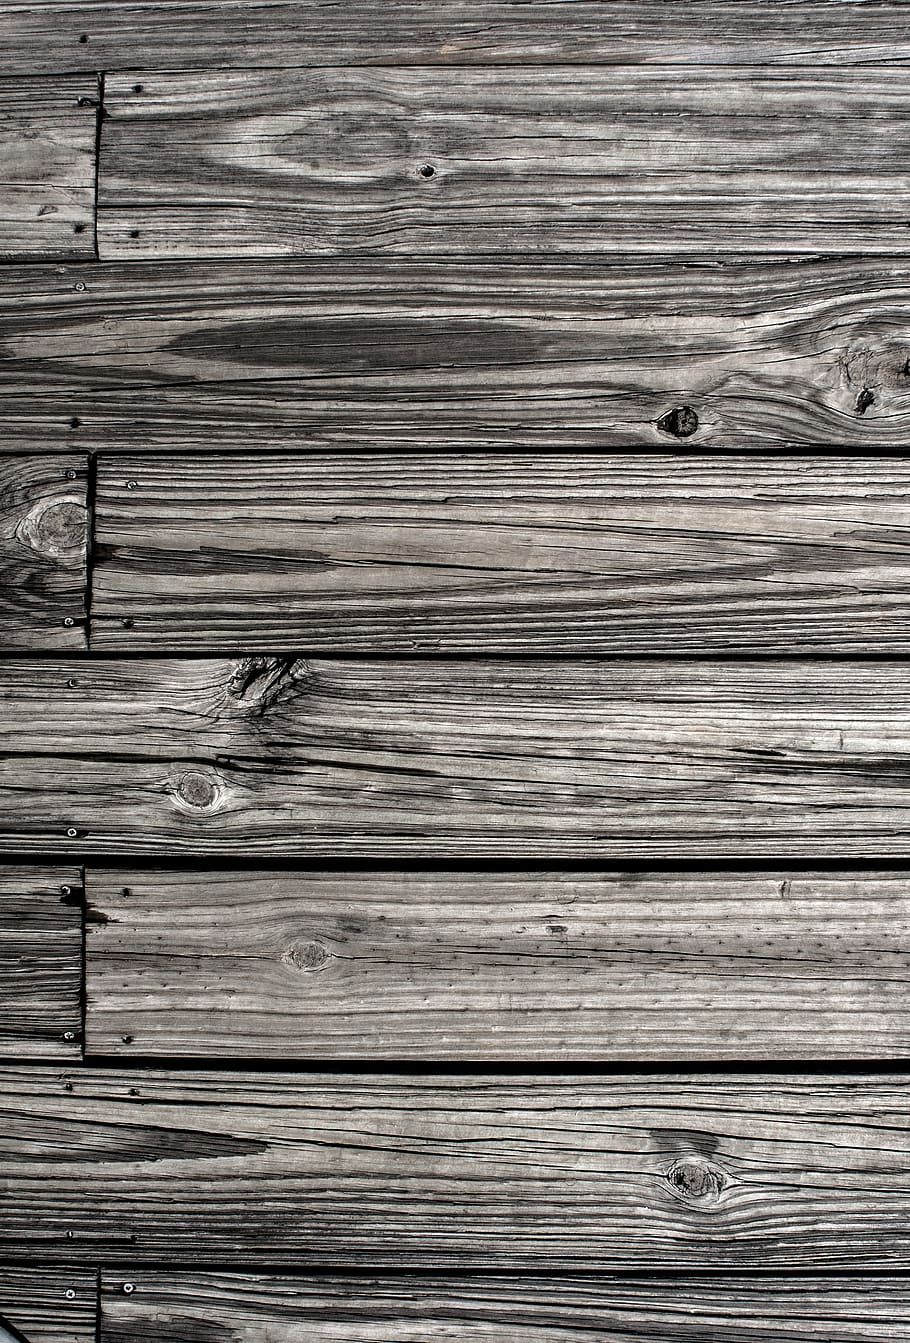 flooring, plank, black and white, grain, summer, afternoon, wooden, wood - Material, backgrounds, pattern